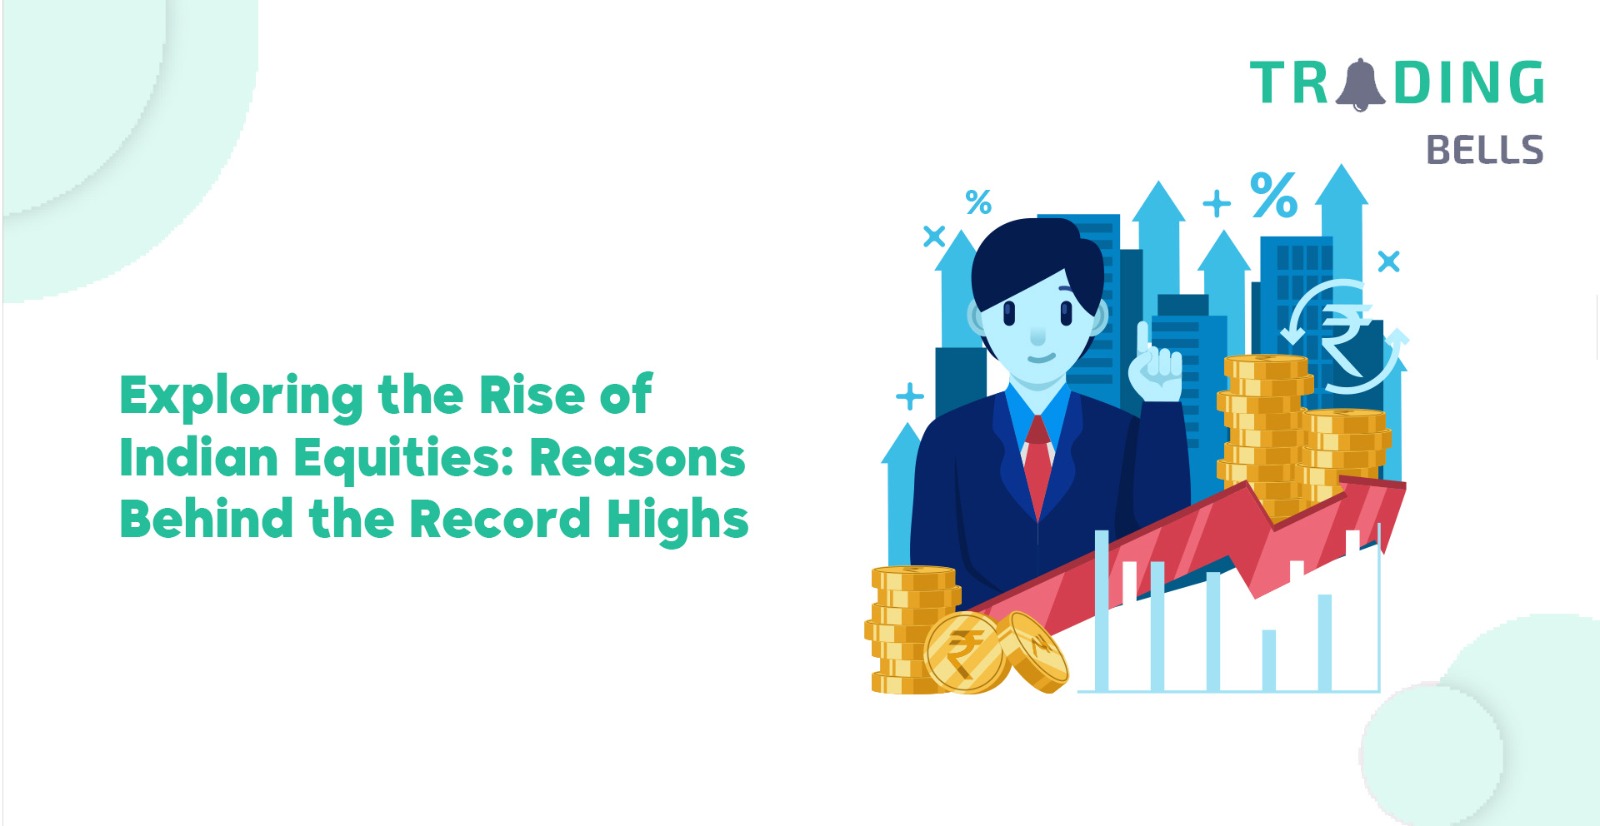  Rise of Indian Equities: Reasons Behind the Record Highs